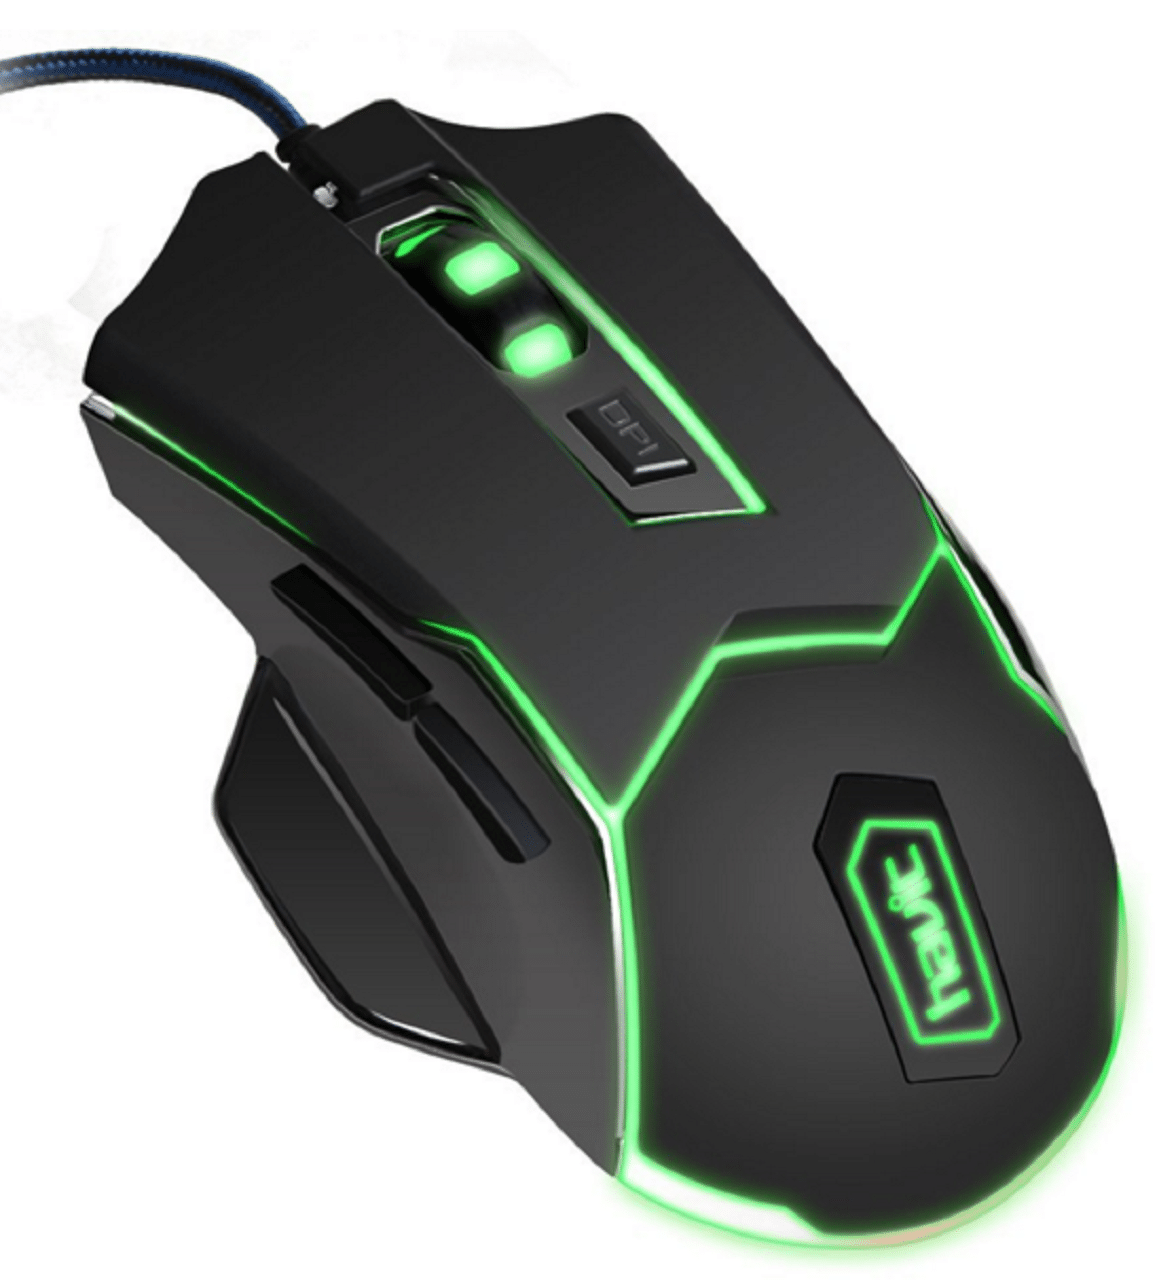 havit gaming mouse not scroll